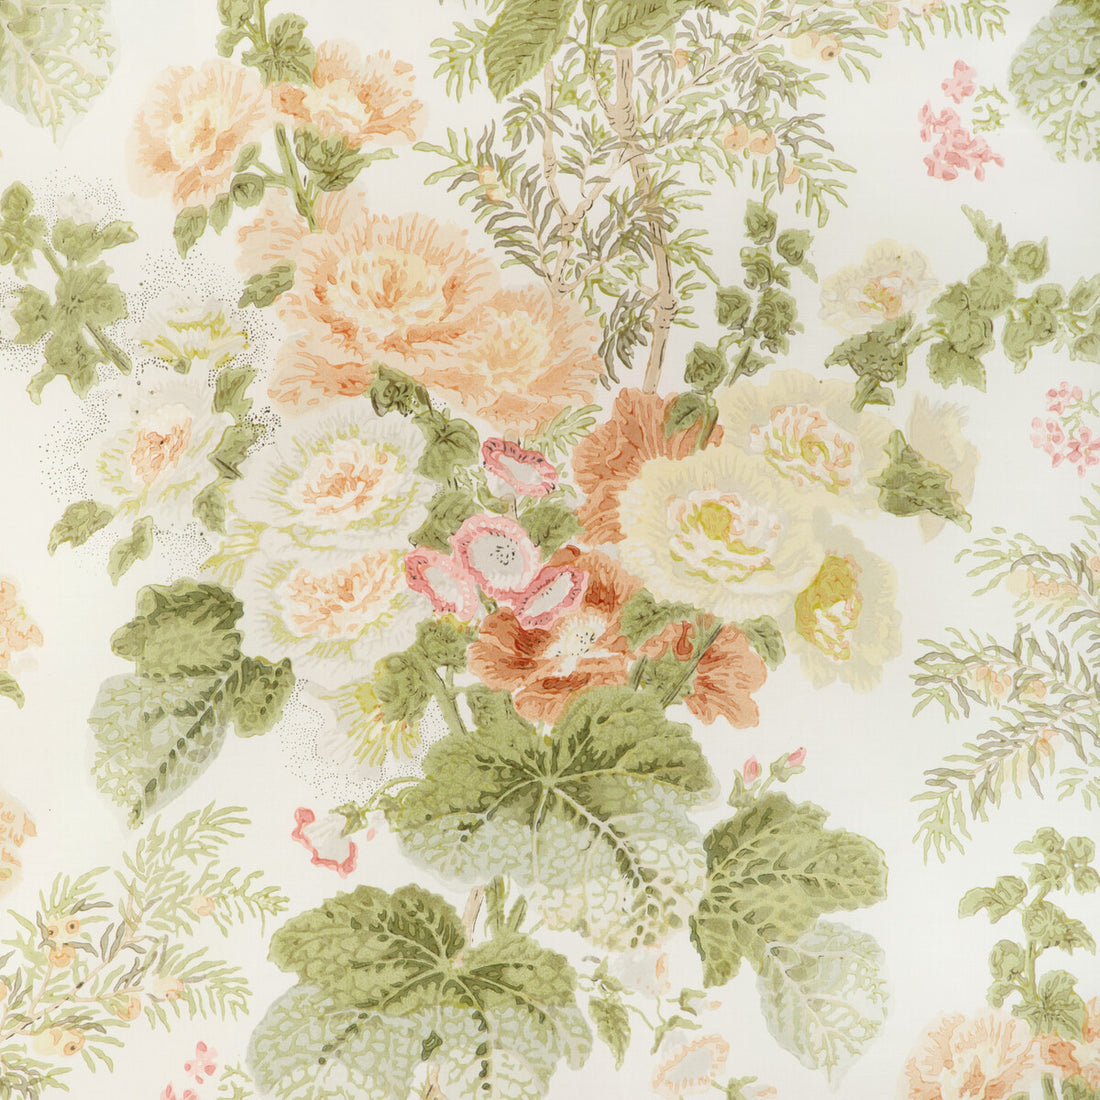 Hollyhock Hdb fabric in apricot/moss color - pattern 2005100.312.0 - by Lee Jofa in the Lee Jofa 200 collection